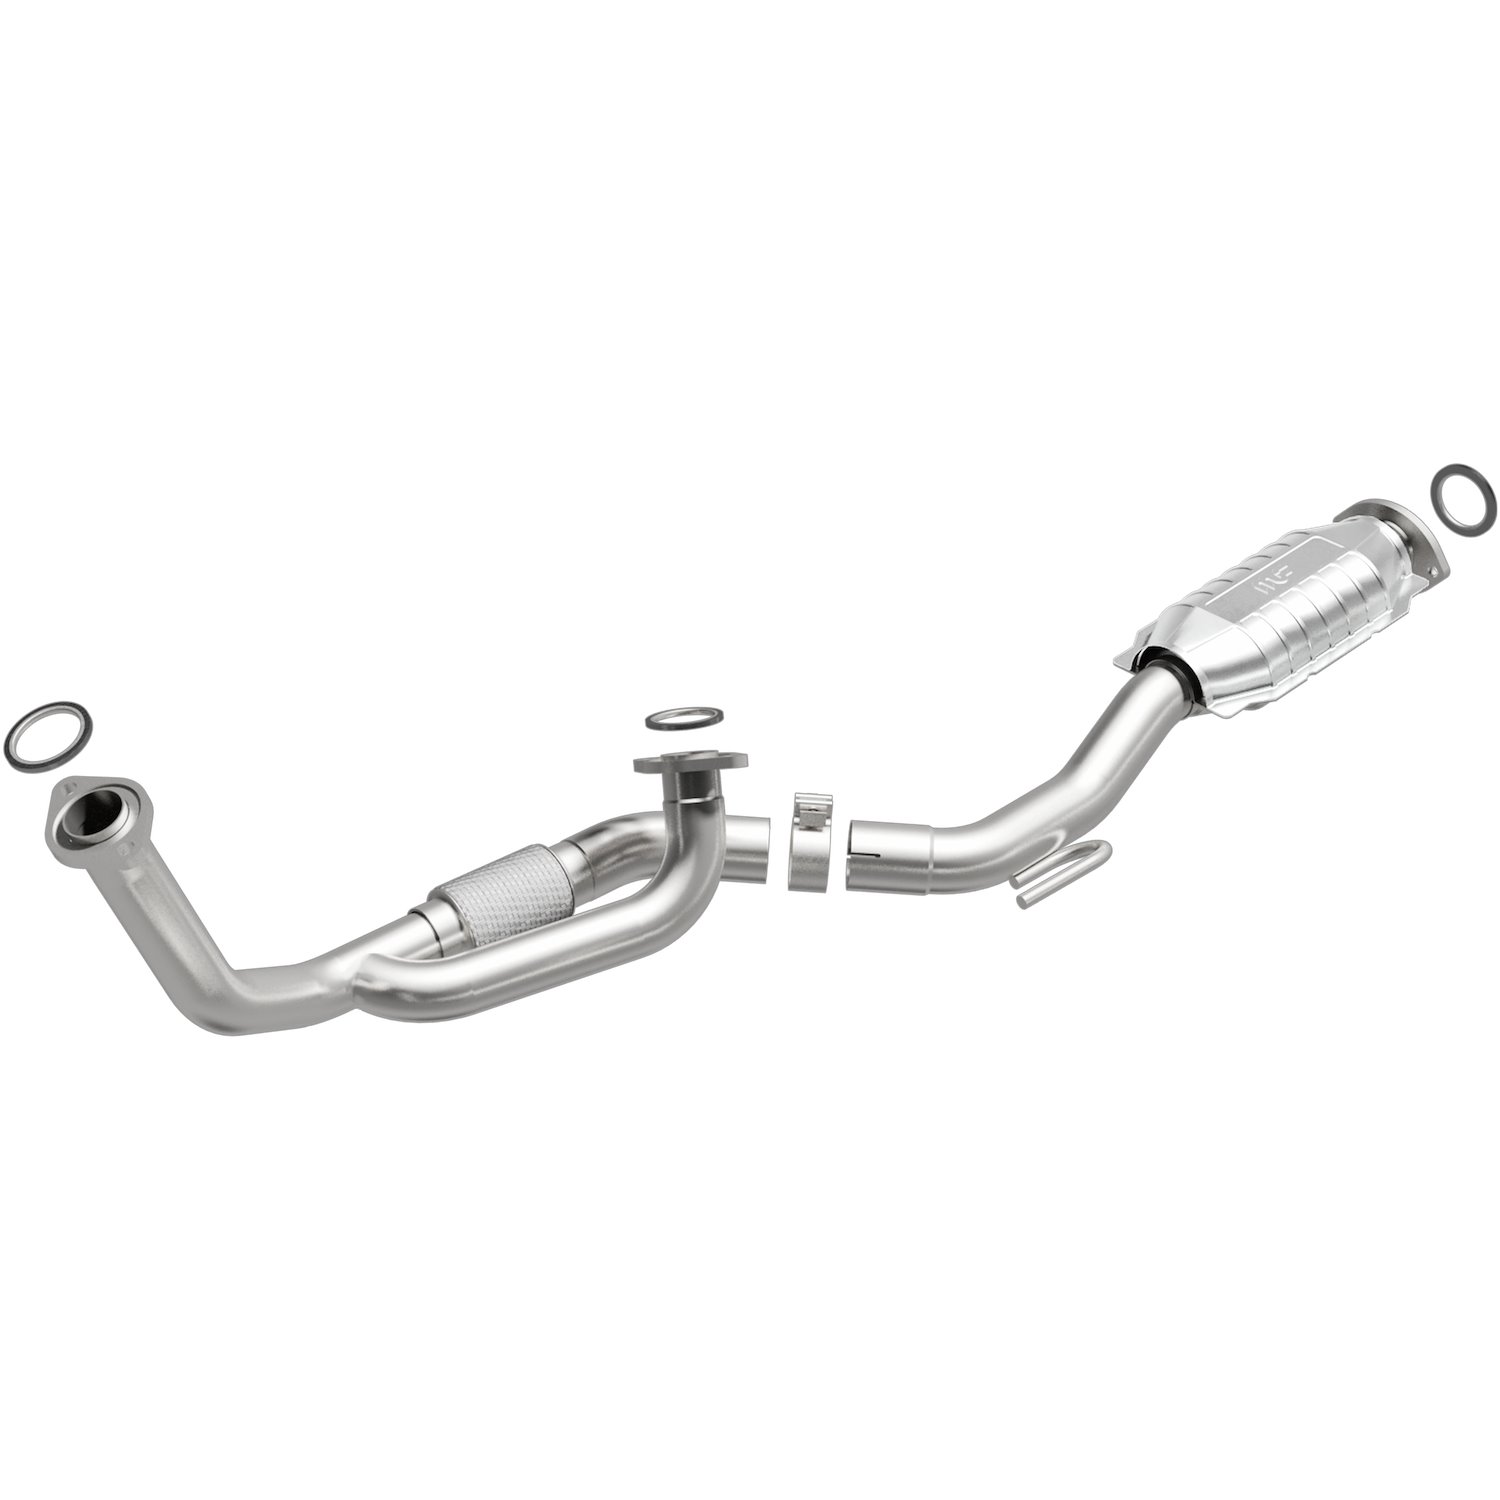 HM Grade Federal / EPA Compliant Direct-Fit Catalytic Converter 93269